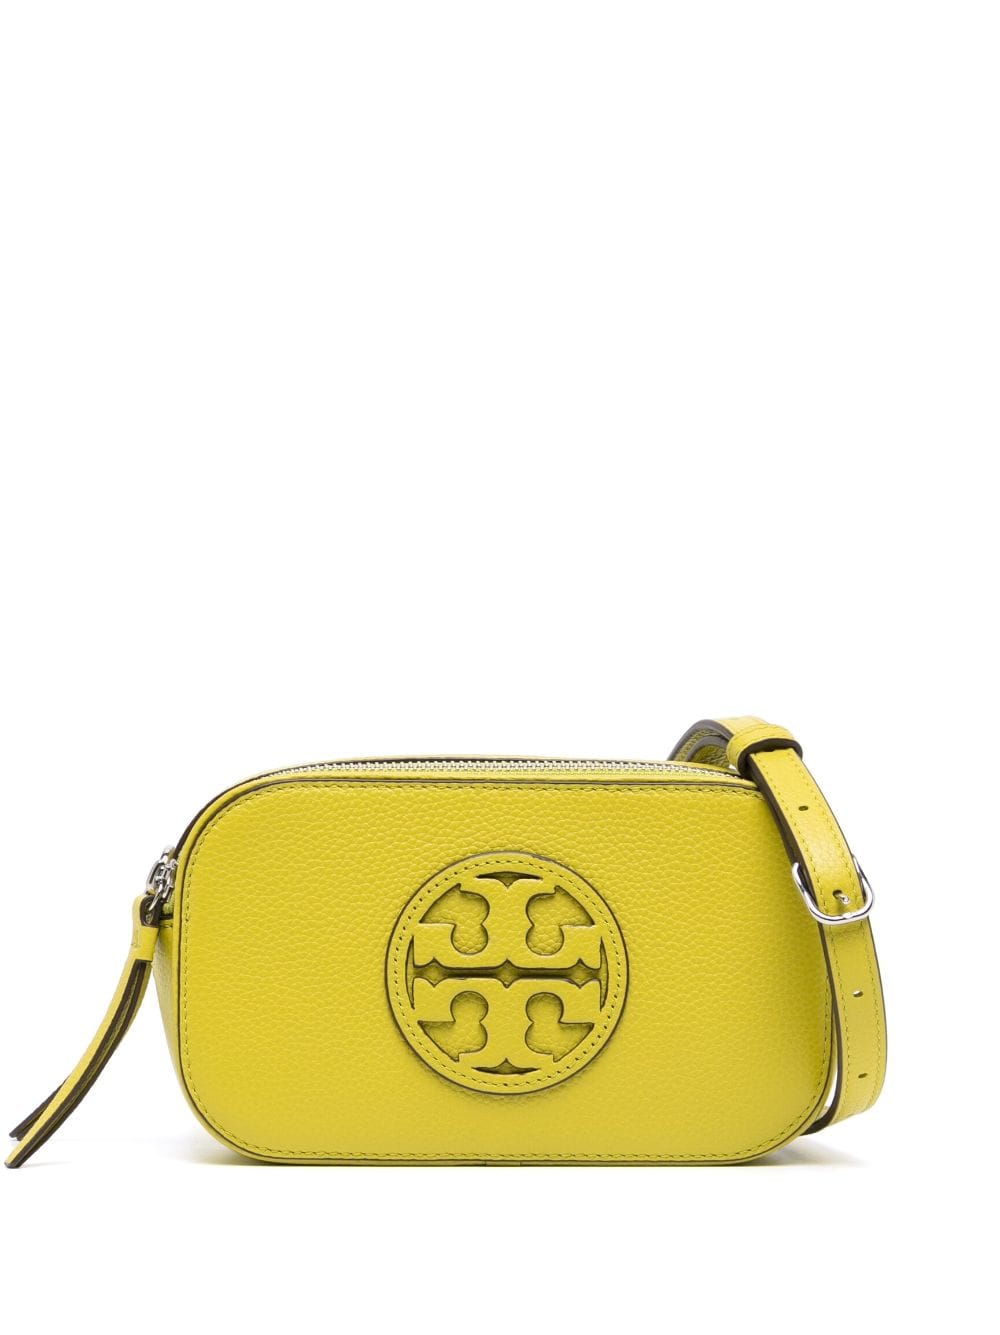 Elevate Your Style: Tory Burch Women's Handbag Sale at Farfetch!